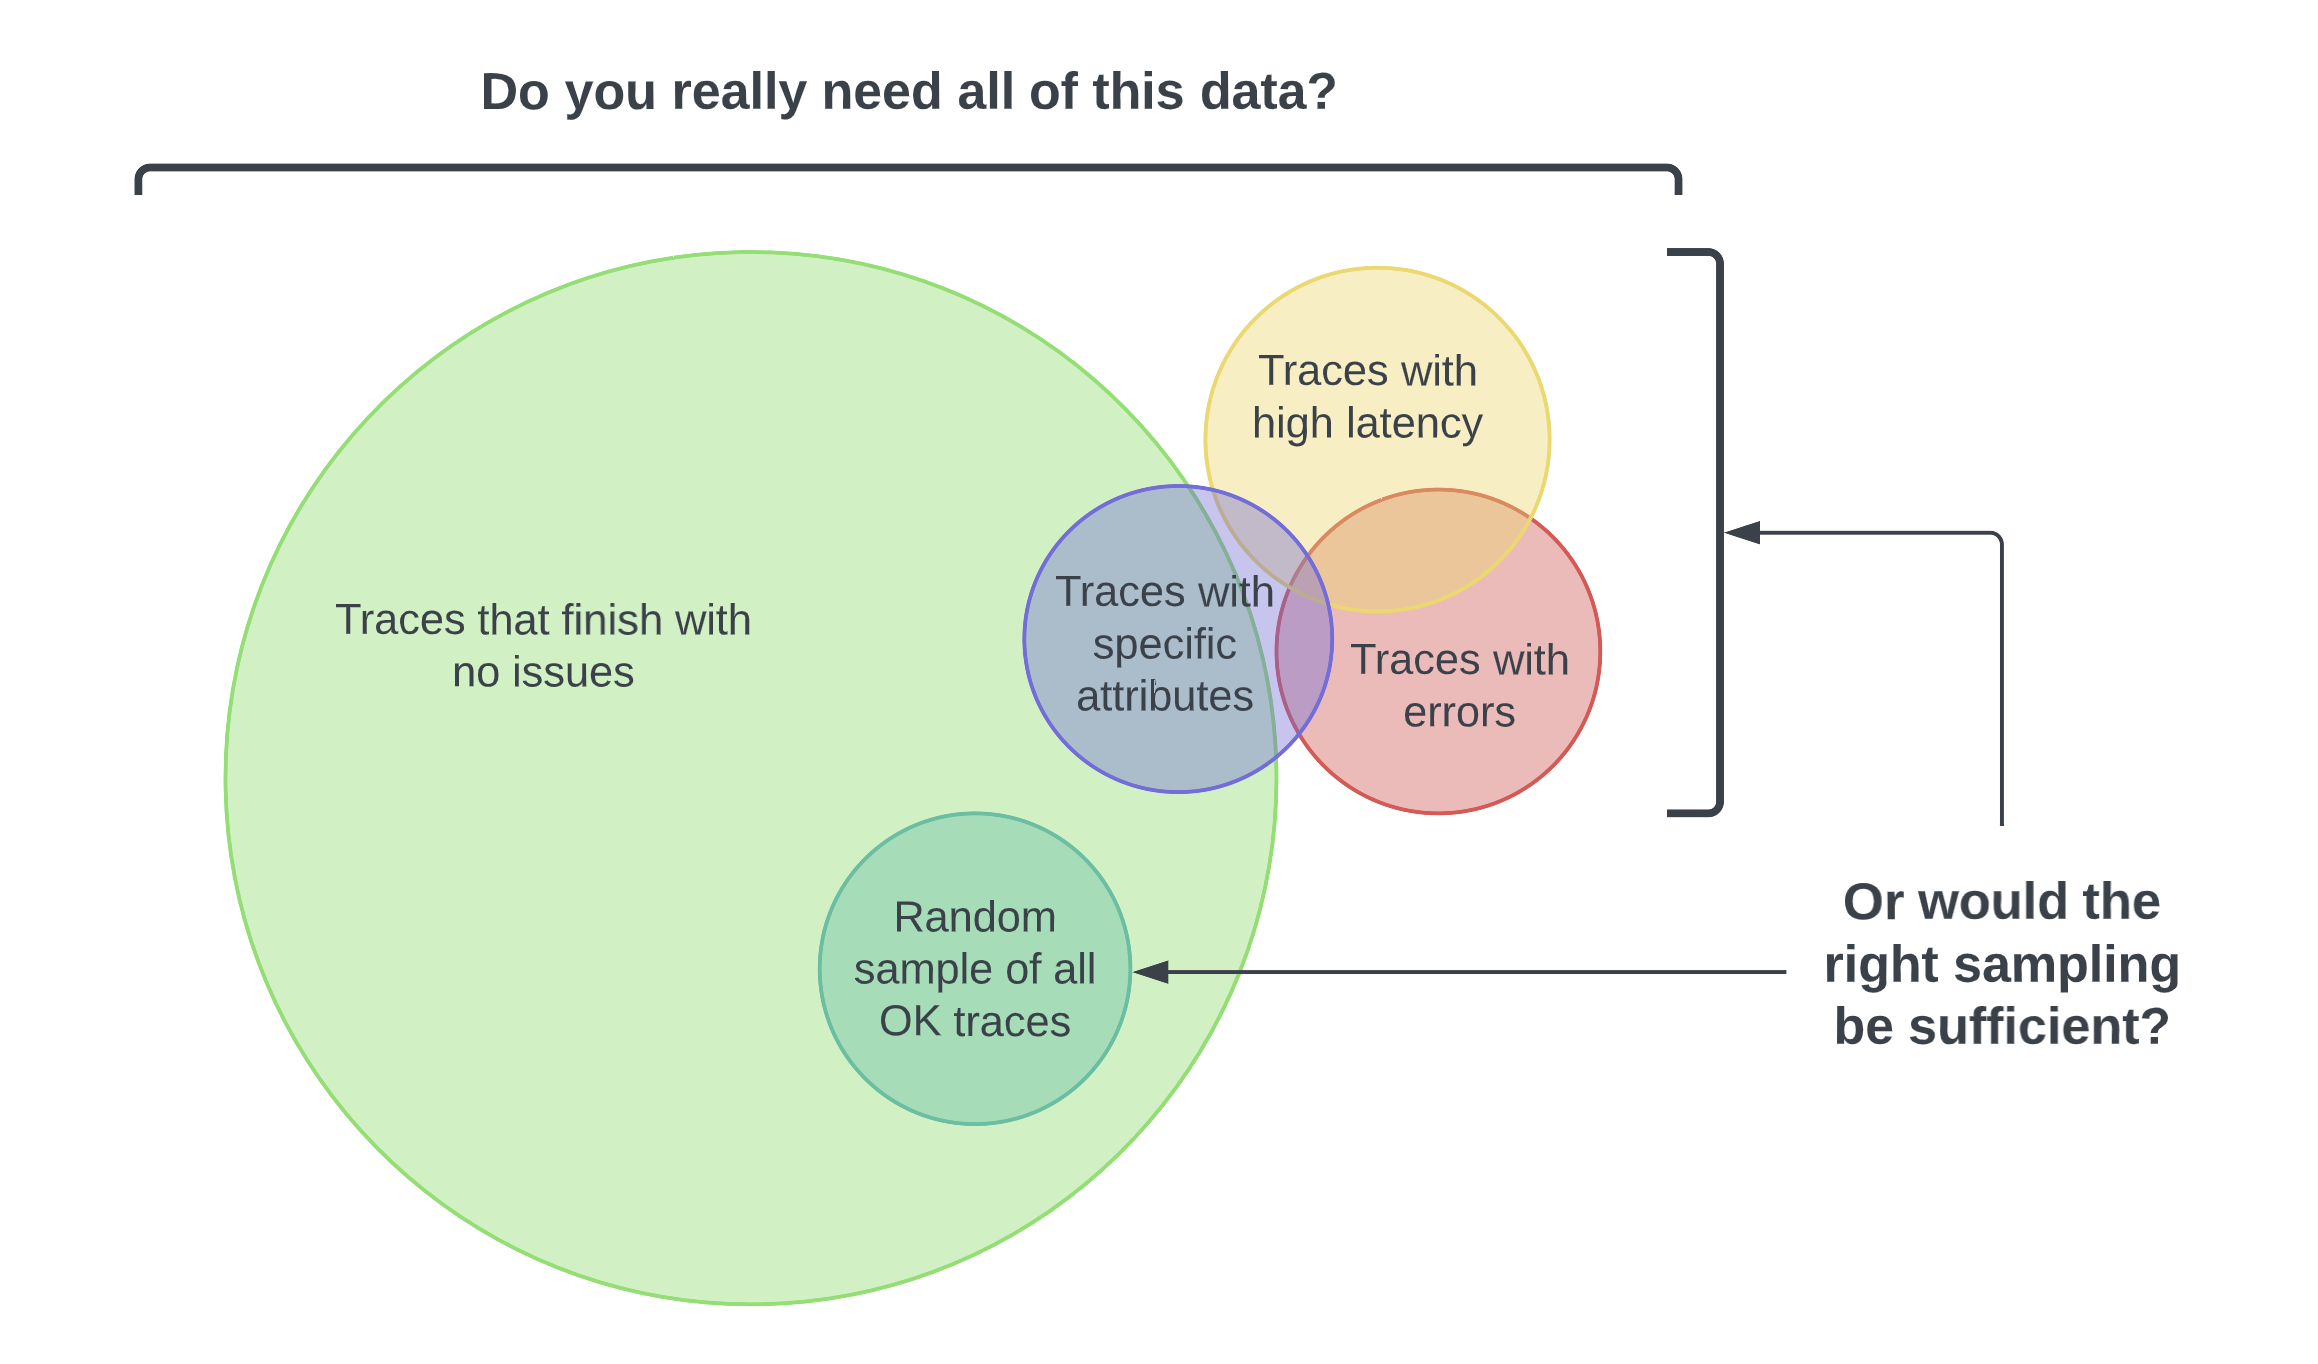 Illustration shows that not all data needs to be traced, and that a sample of data is sufficient.